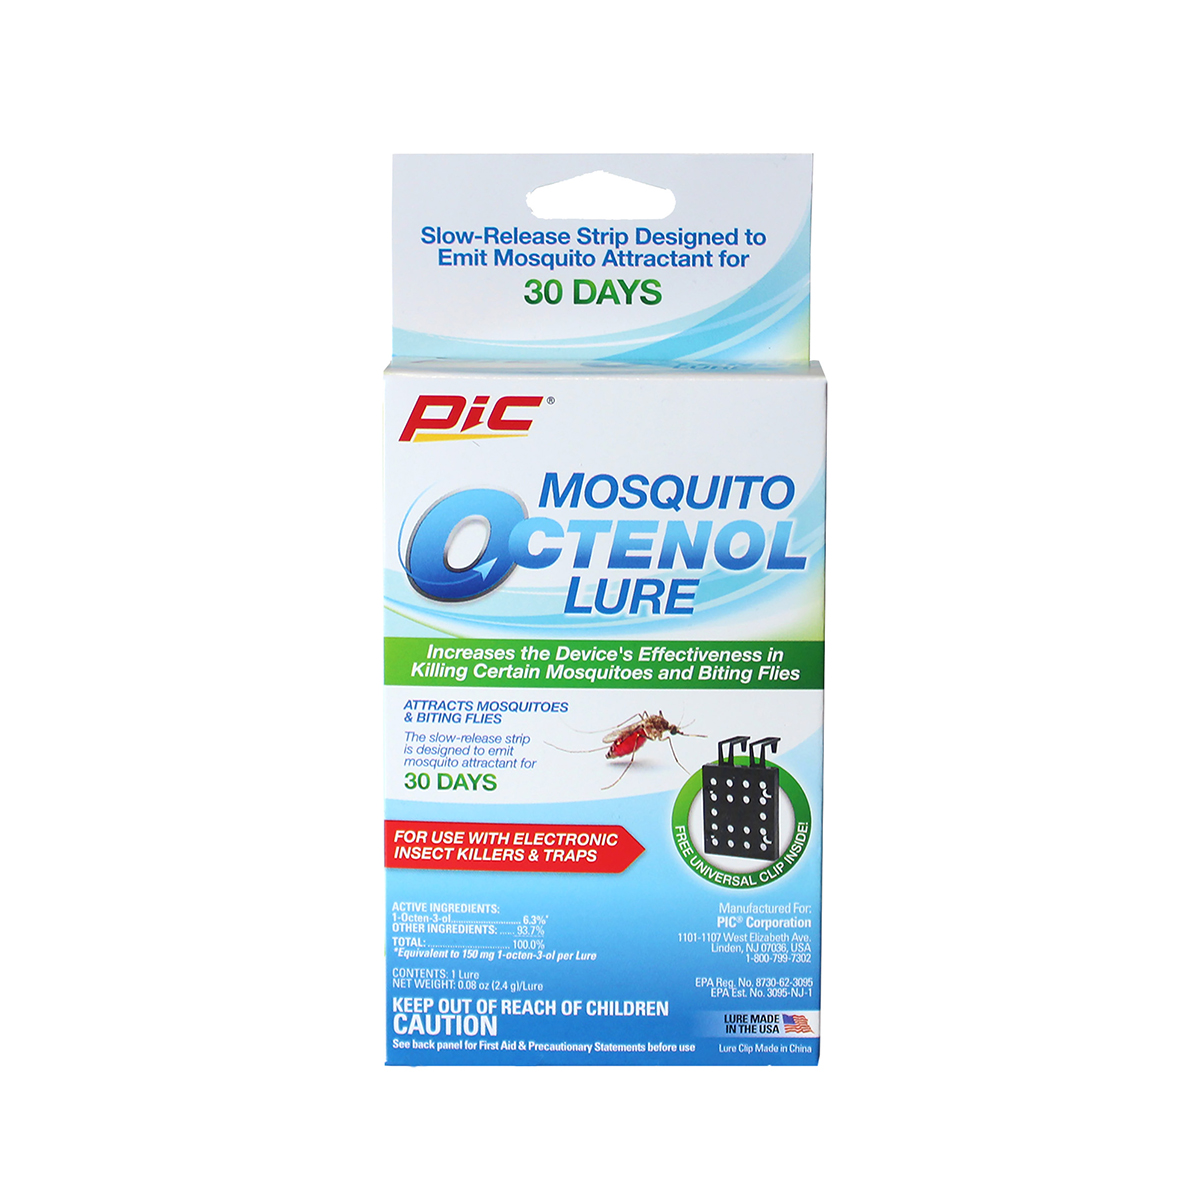 1 Portable Mosquito Zapper with 60 days of Mosquito Lure - Pic Corp